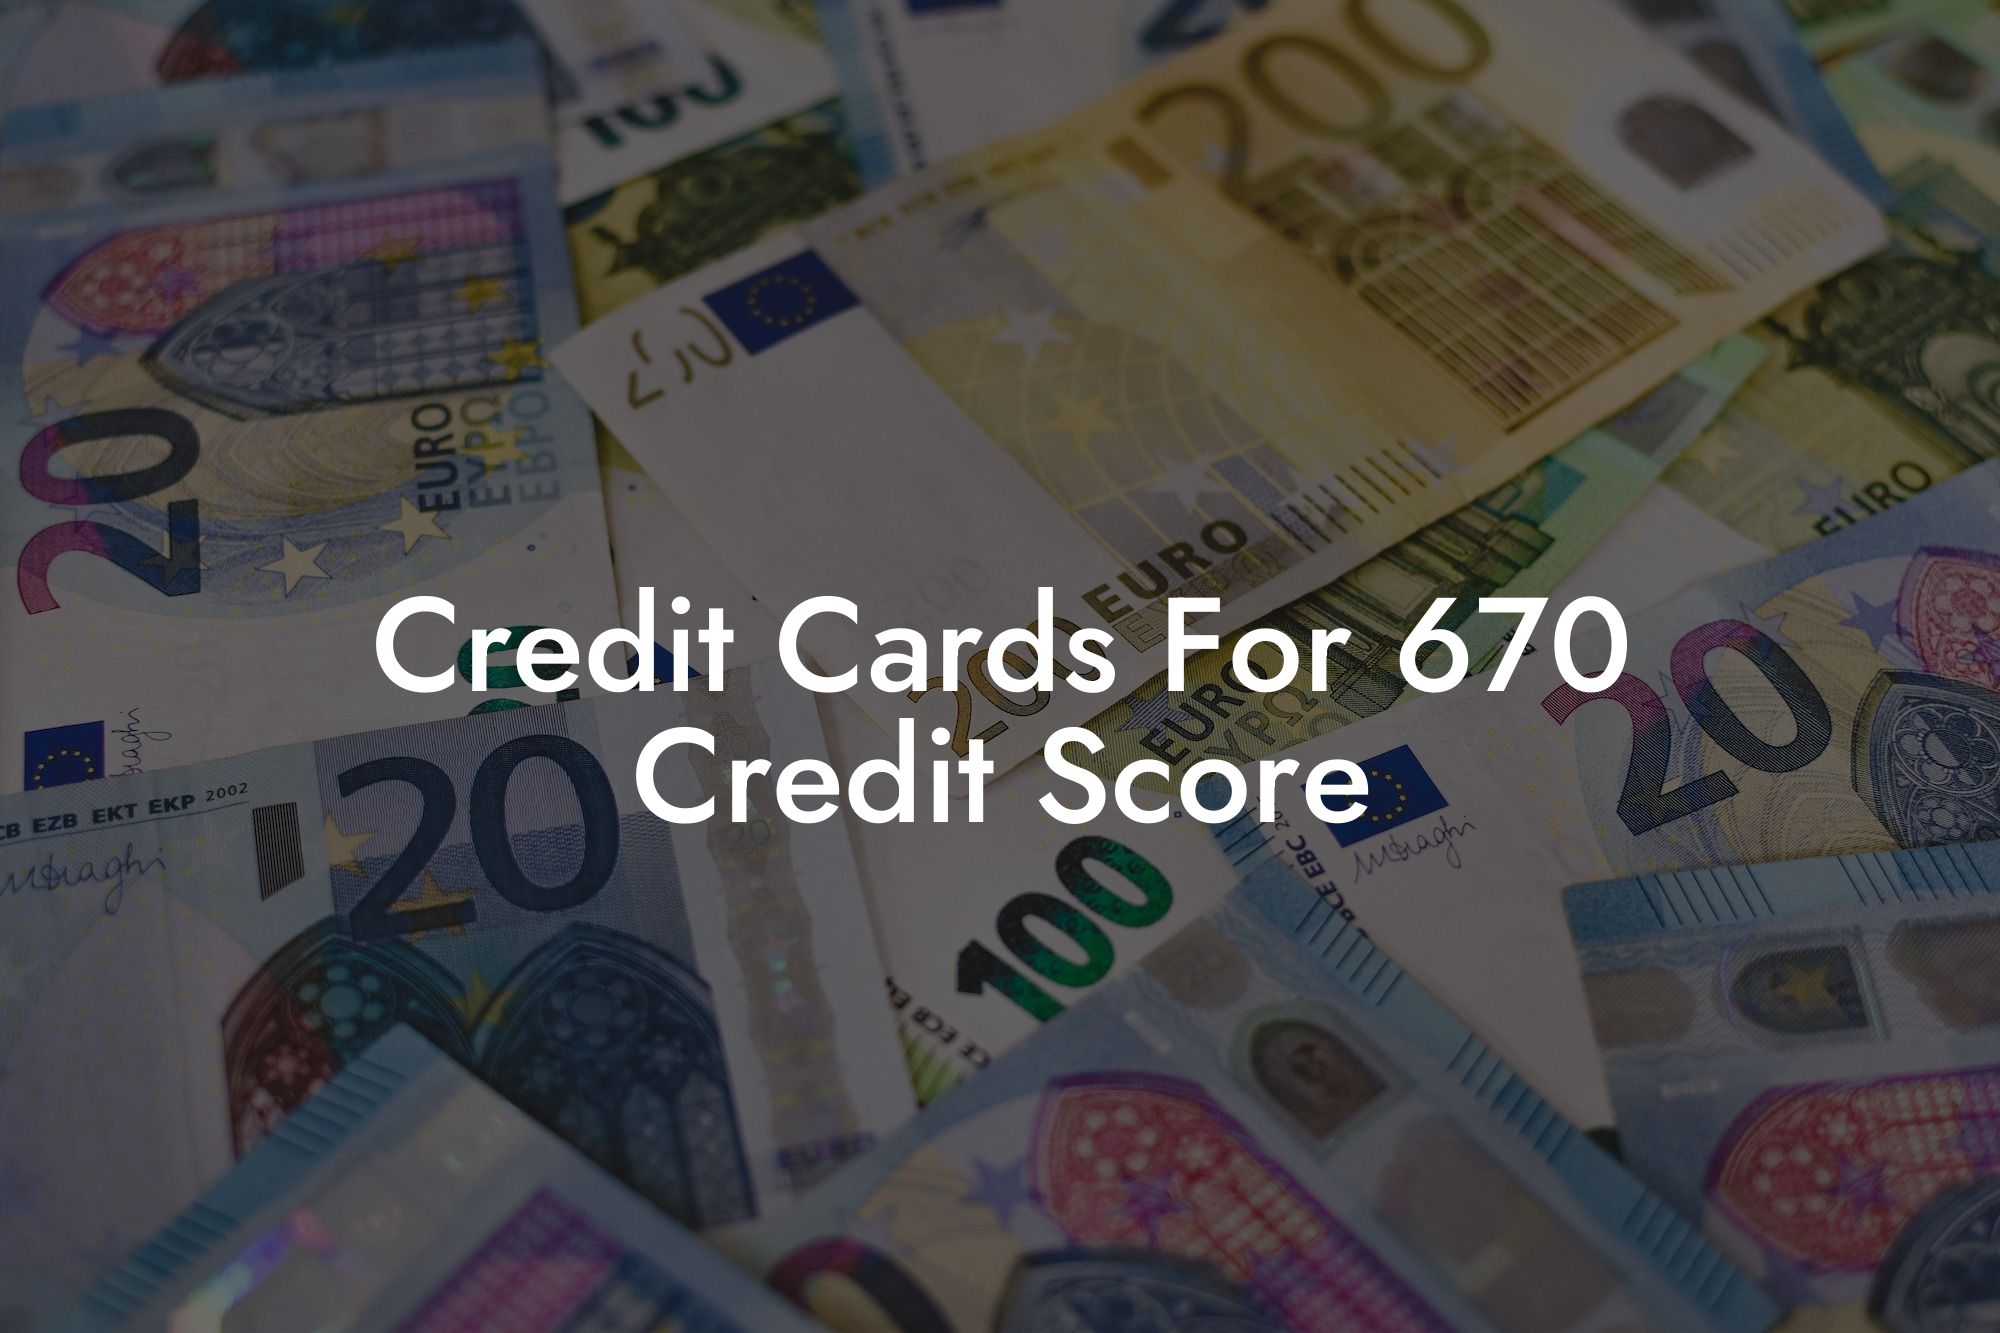 Credit Cards For 670 Credit Score